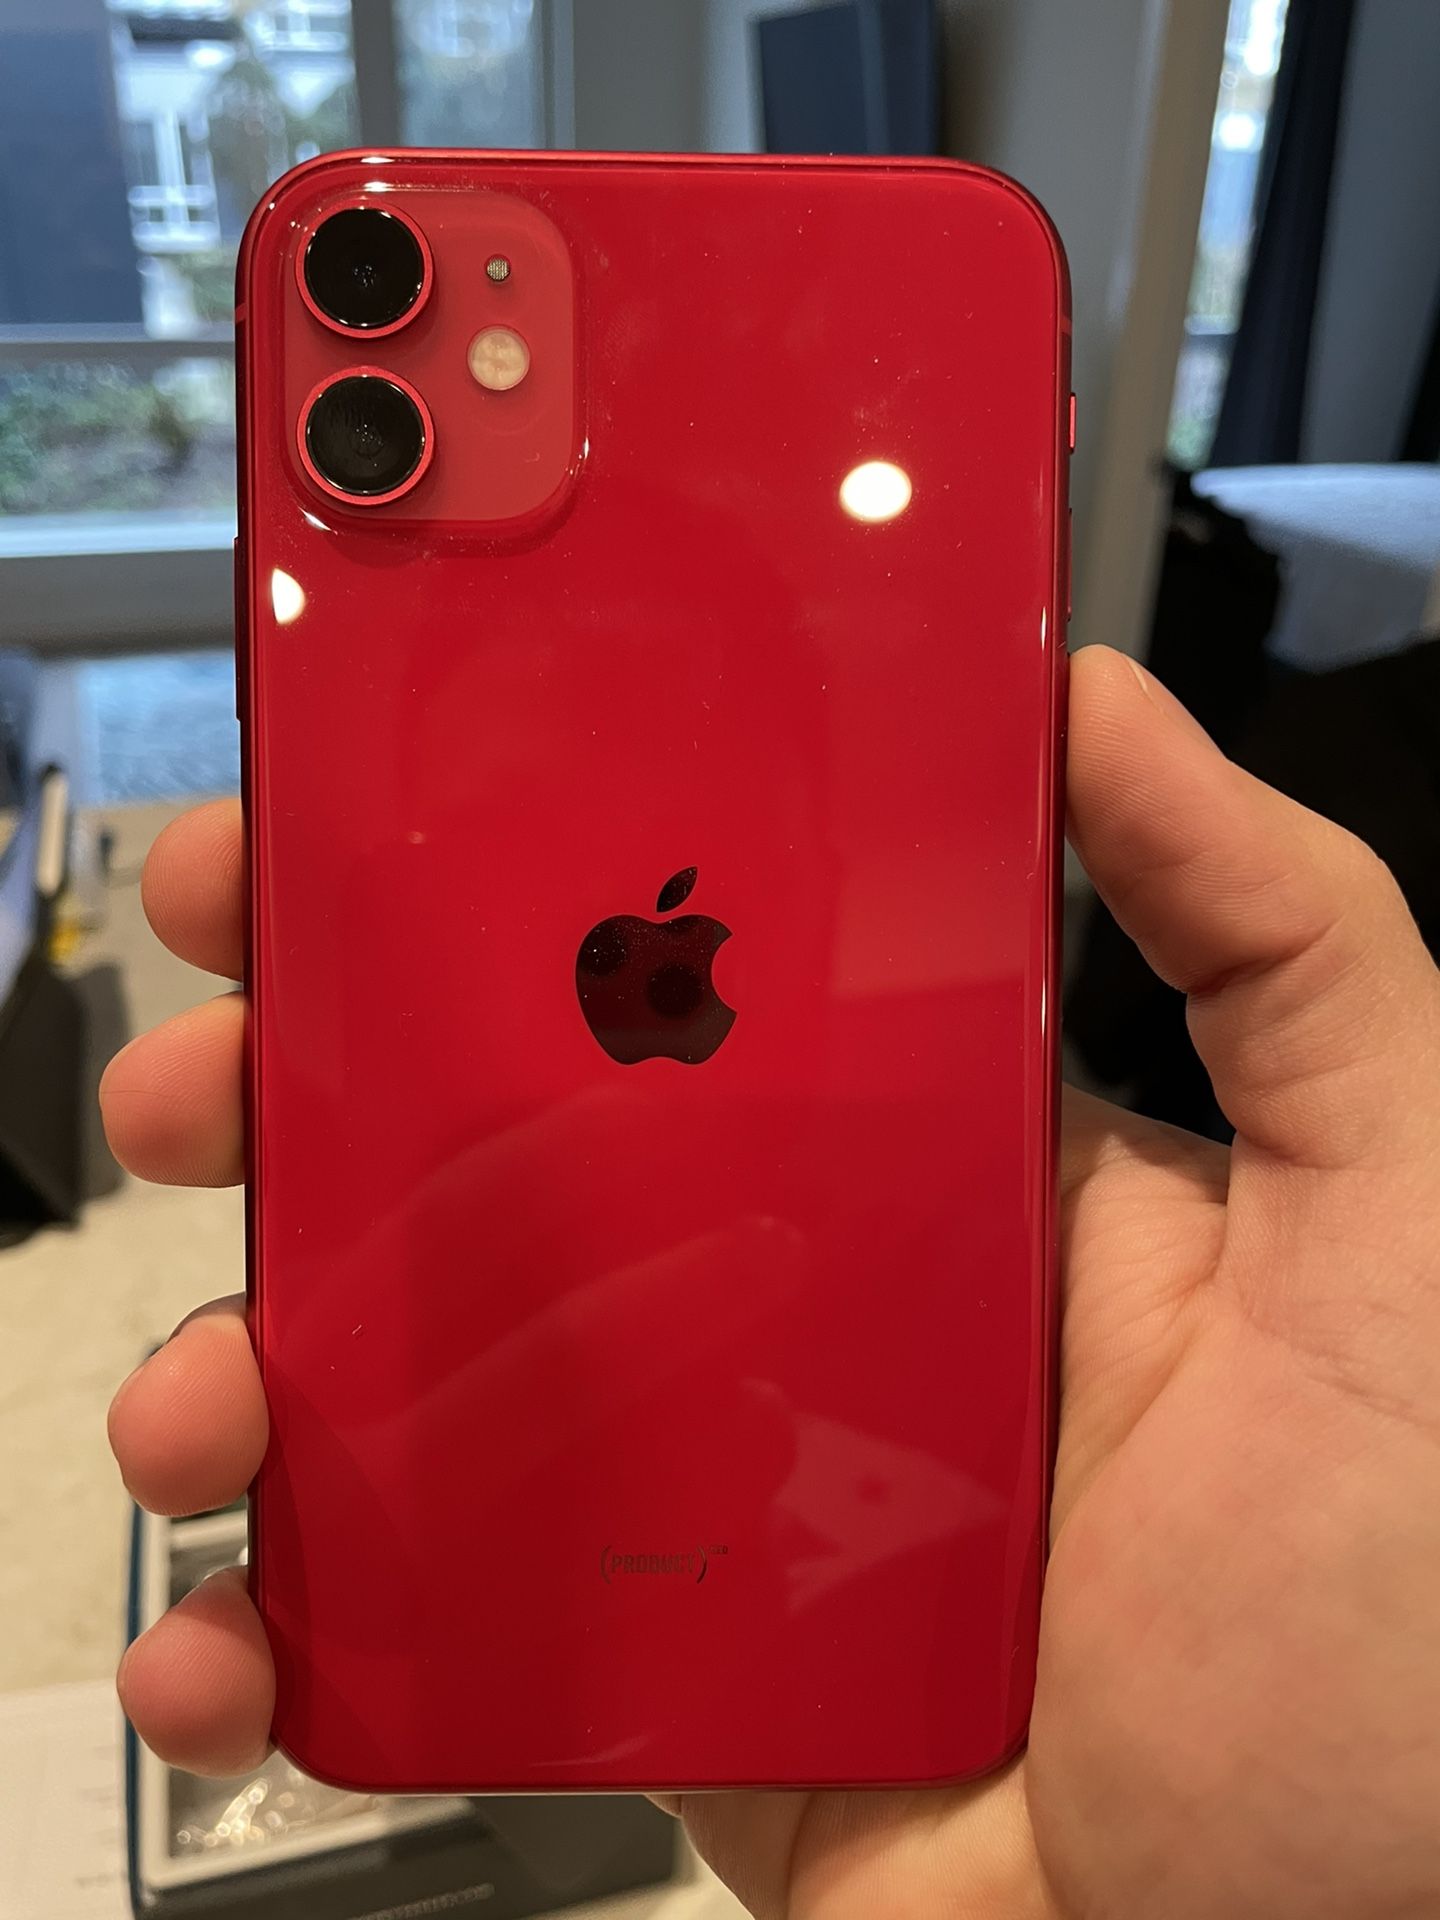 Iphone 11 64gb Product Red In New Condition For Sale In Bellevue Wa Offerup